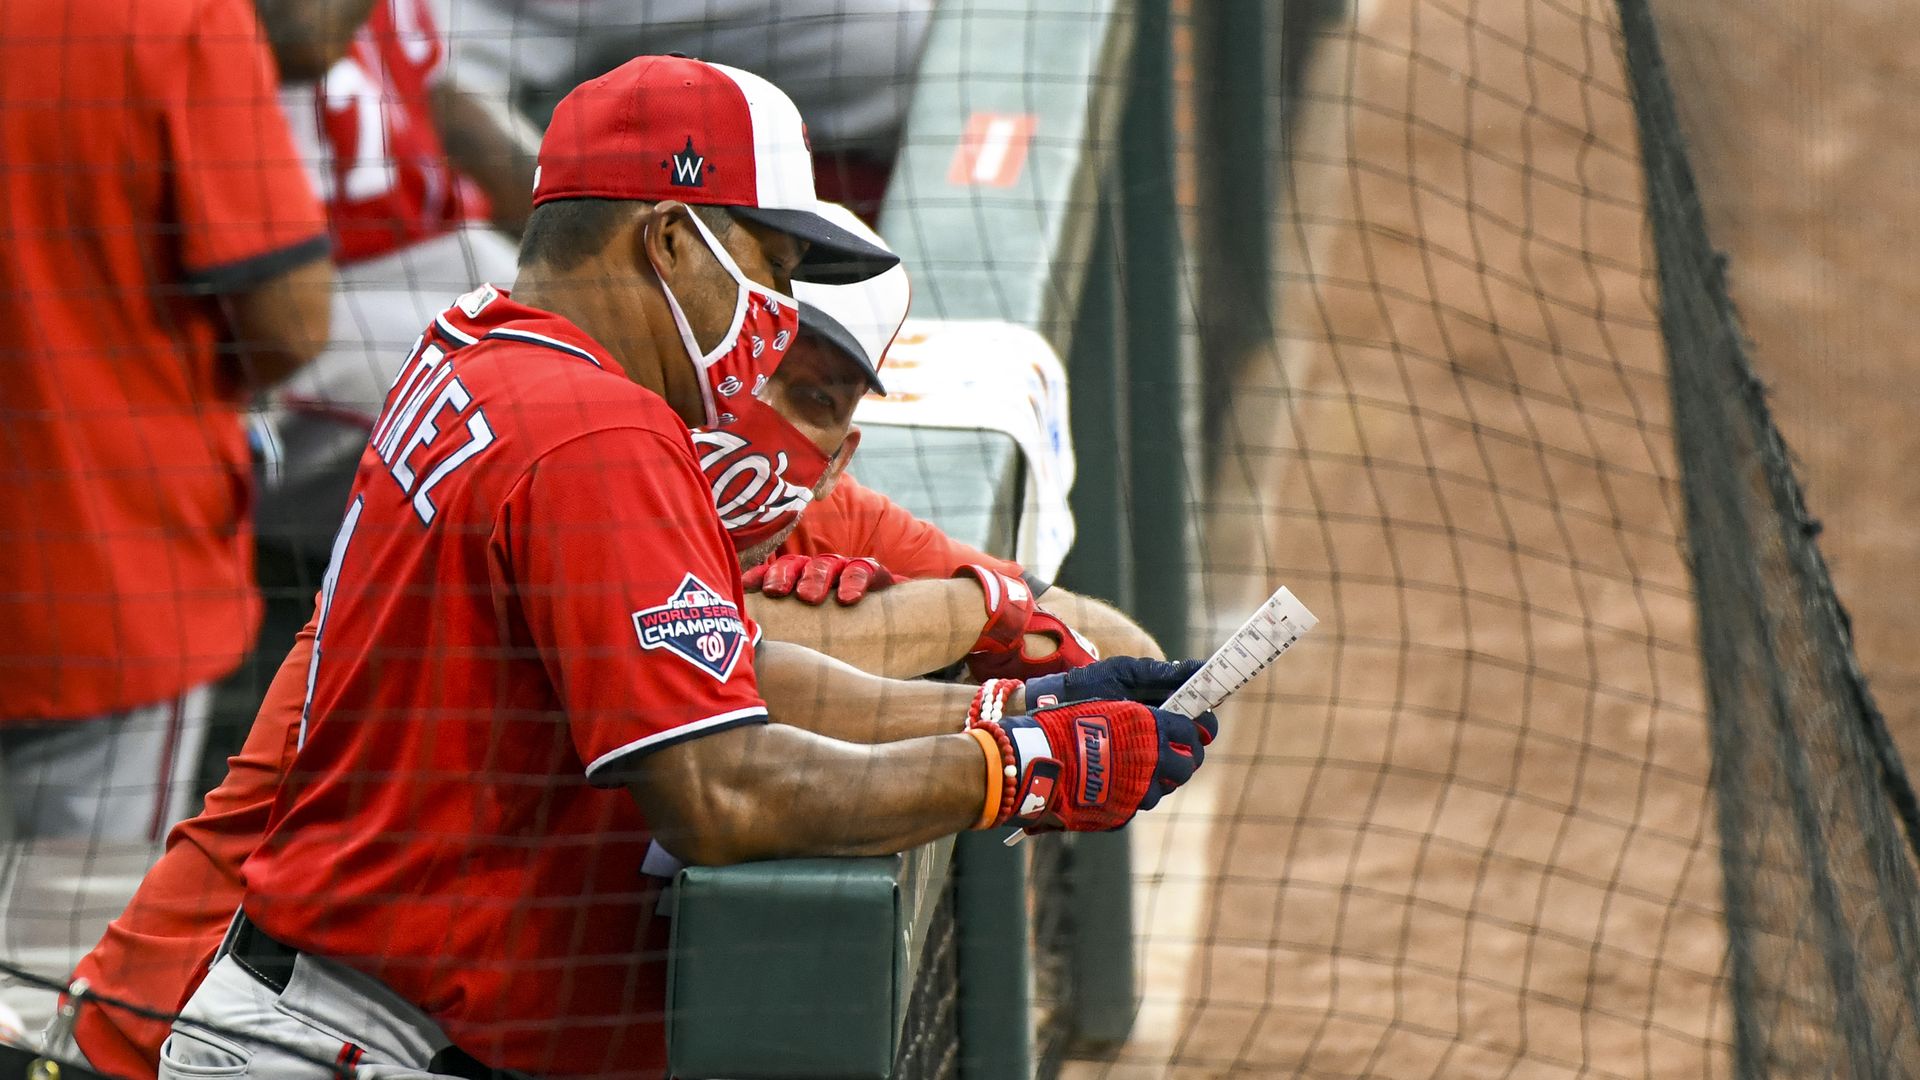 Washington Nationals manager David Martinez reviews his lineup during a spring training game against the Baltimore Orioles on Monday. Photo: Mark Goldman/Icon Sportswire via Getty Images